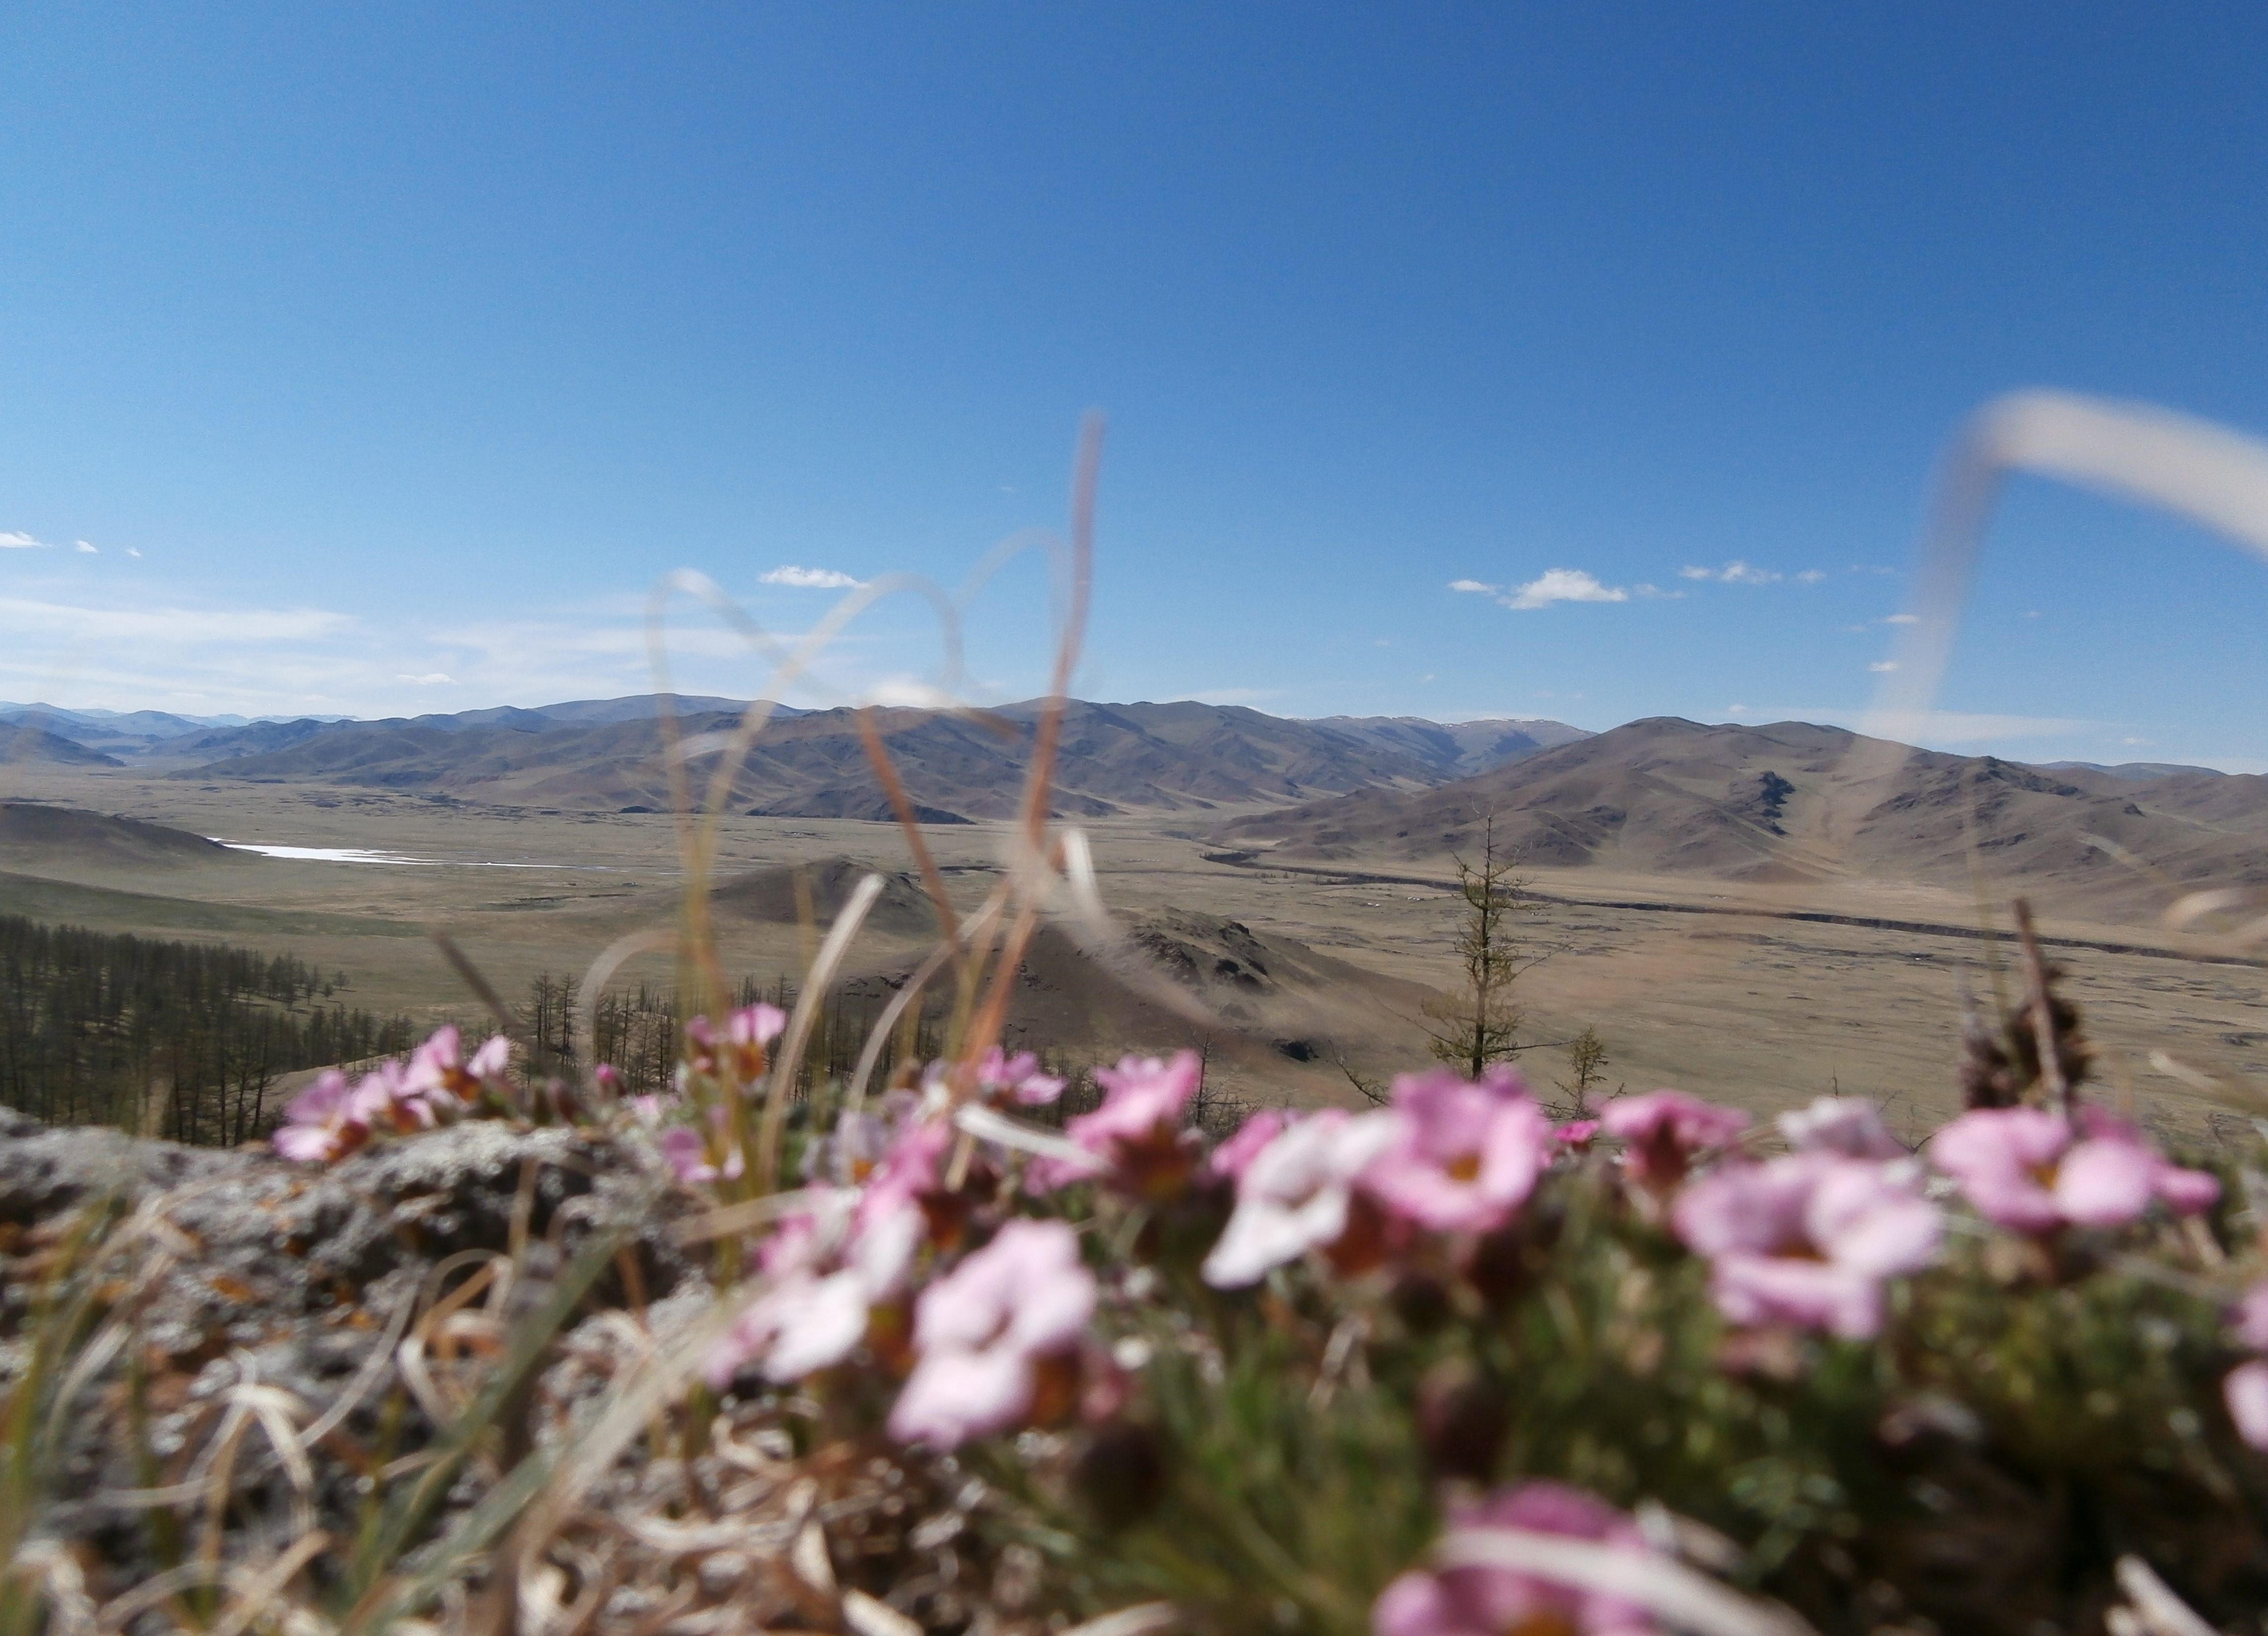 Experience spring in Mongolia in the the Orkhon River Valley, Mongolia. This vast landscape is part of one of Mongolia's four UNESCO World Heritage Sites.